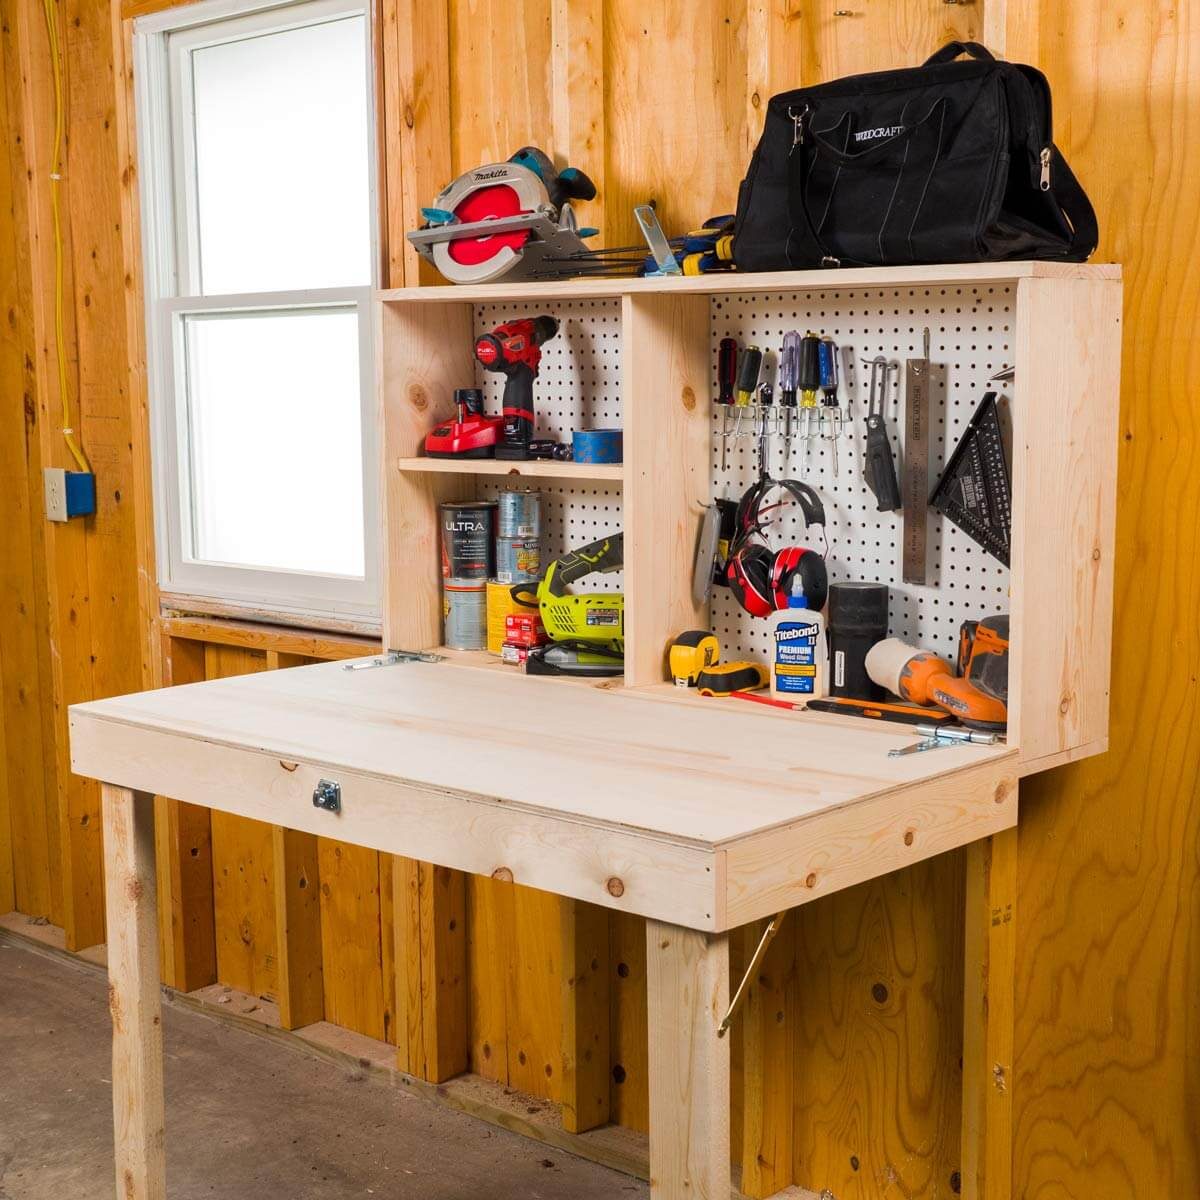 How To Build A Fold Up Workbench On A Wall - Image to u